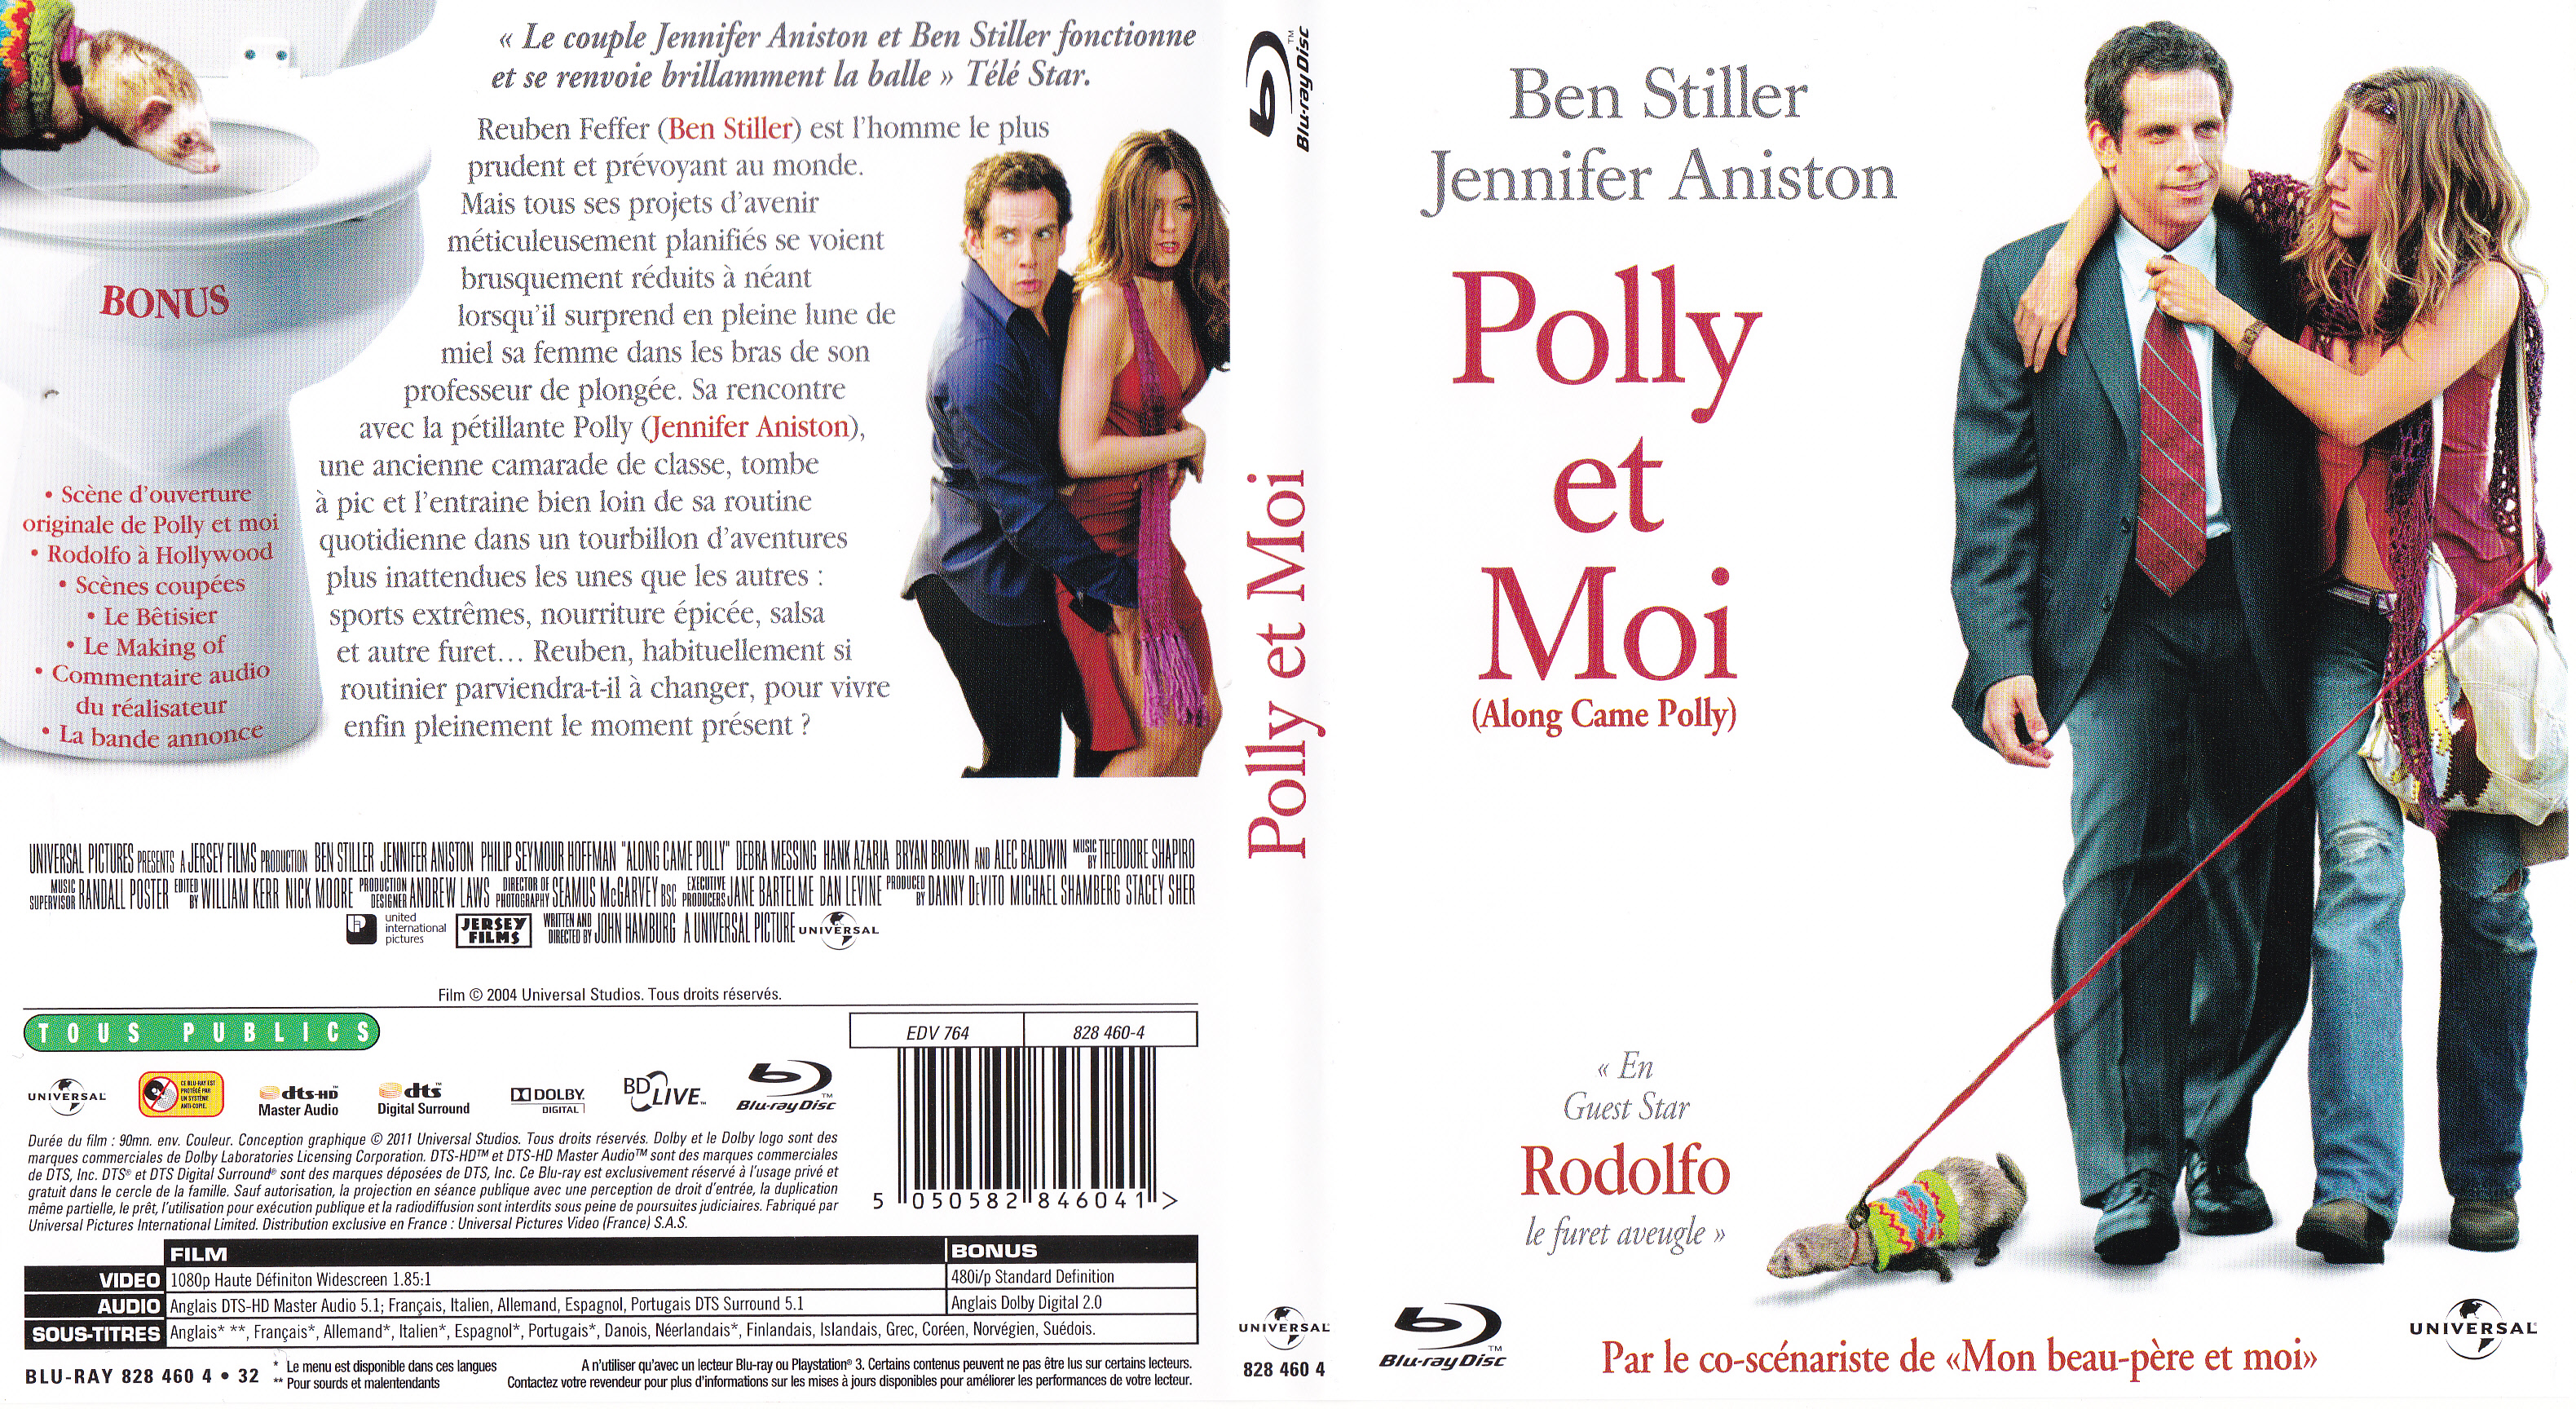 Jaquette DVD Polly et moi (BLU-RAY)